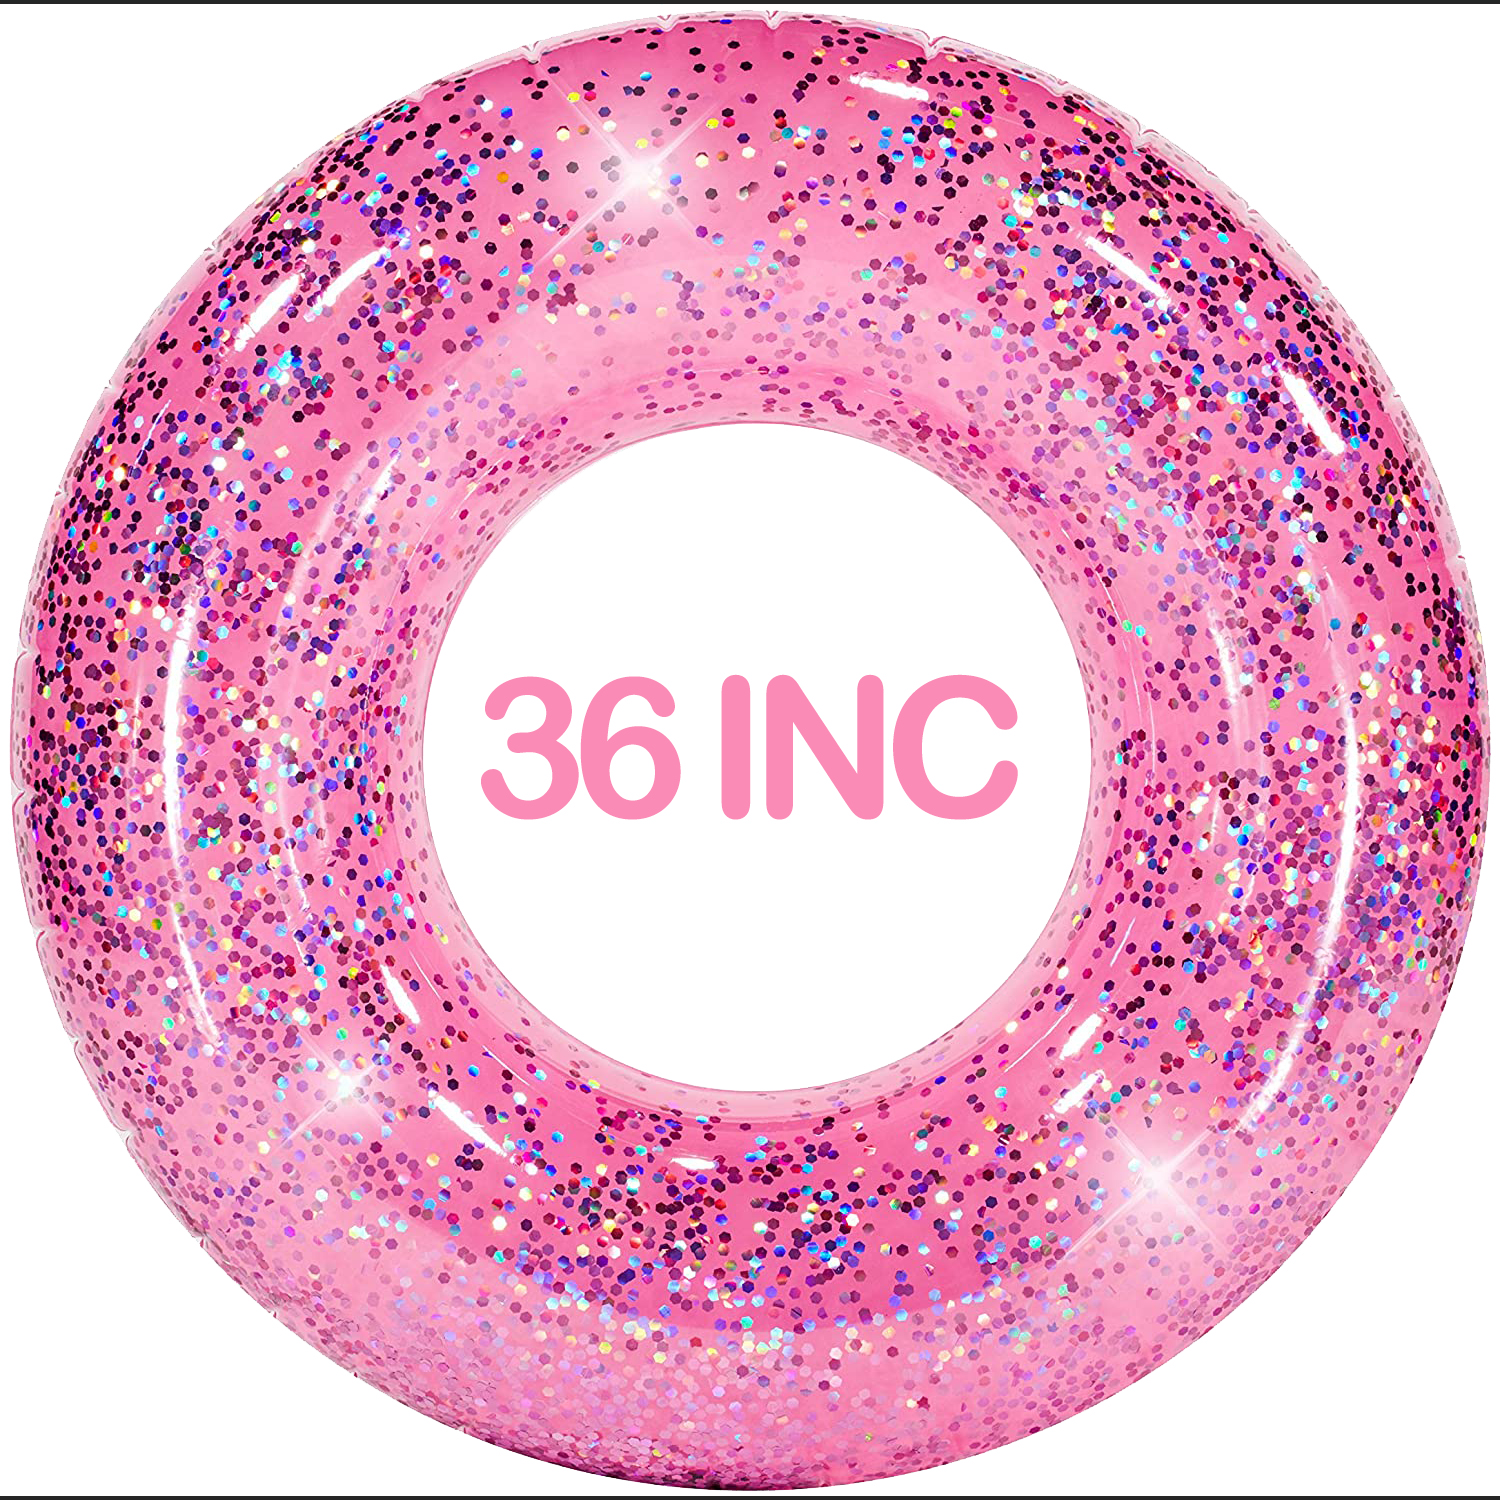 Pink Glitter Swim Ring - Large for The Pool Beach or Lake for Kids and Adults, 36 in - image 1 of 6